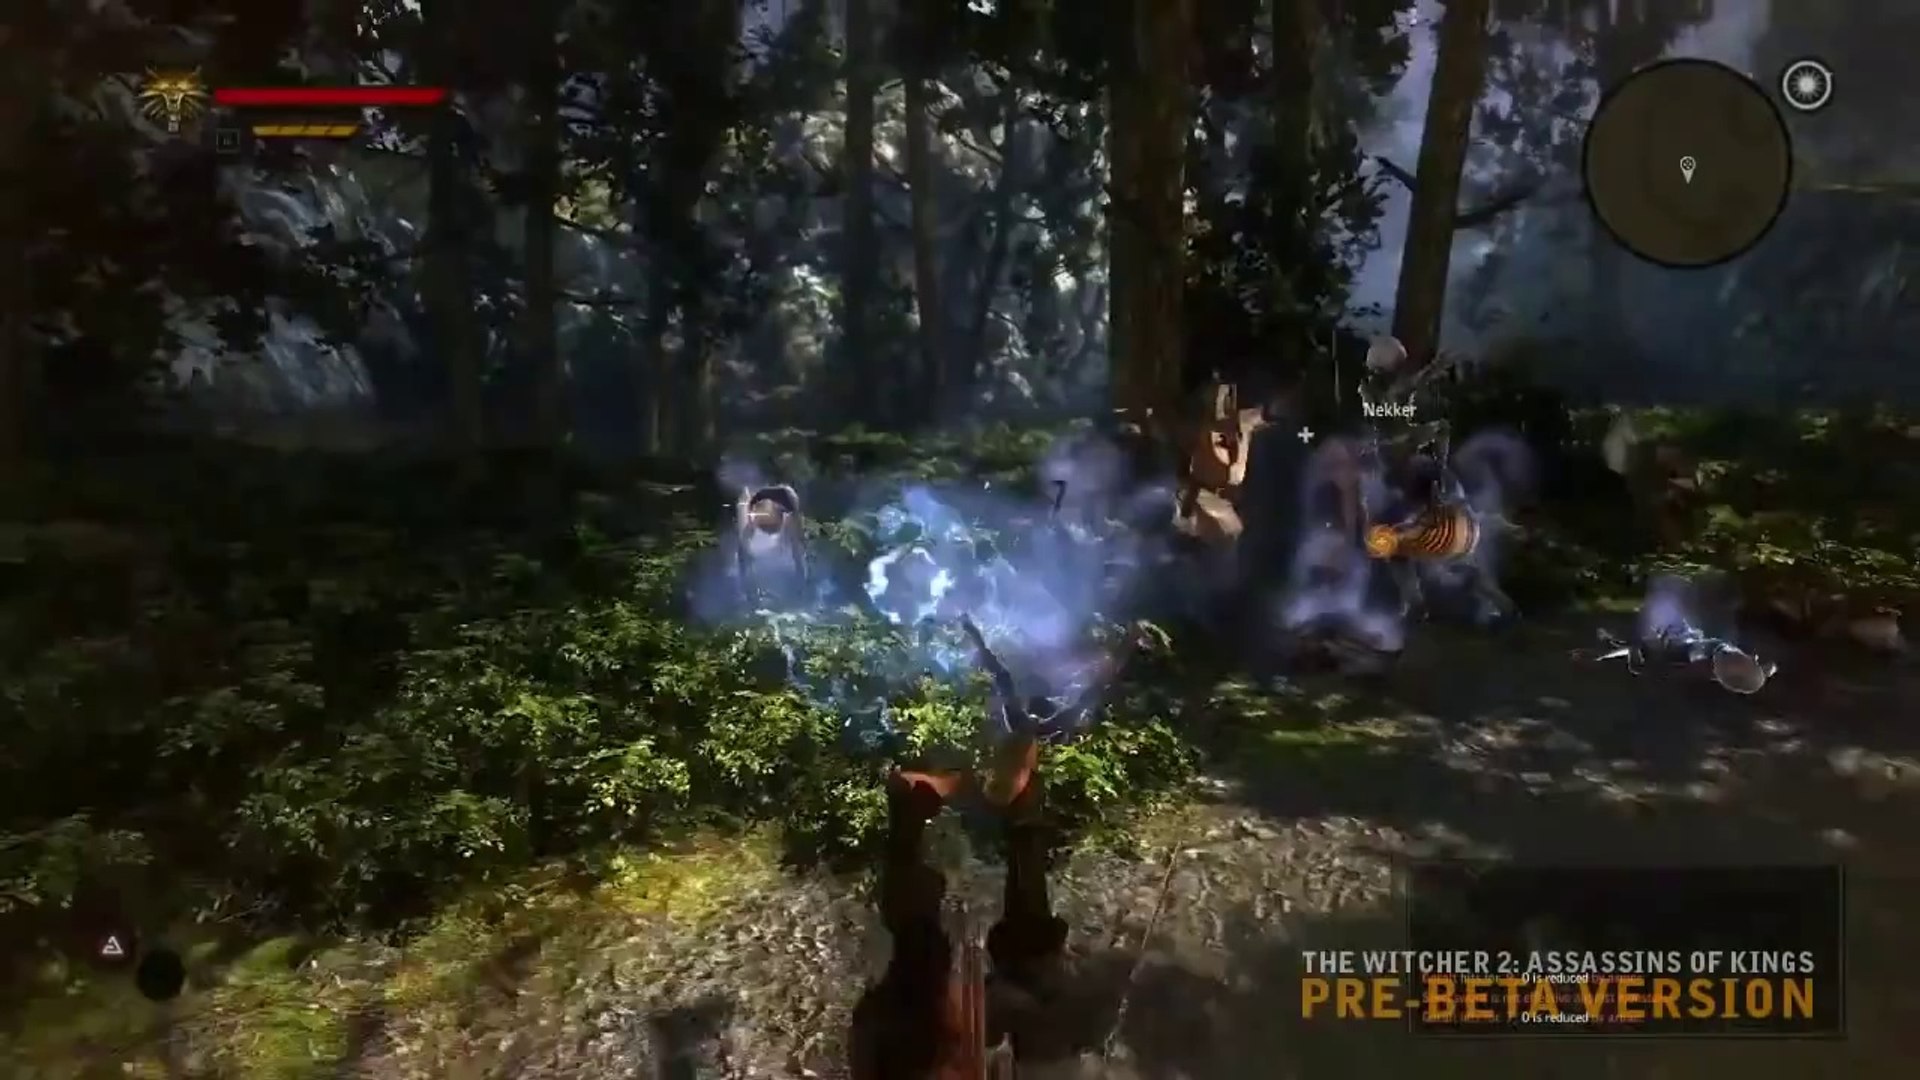 The Witcher 2: Assassins of Kings gameplay #1 - video Dailymotion